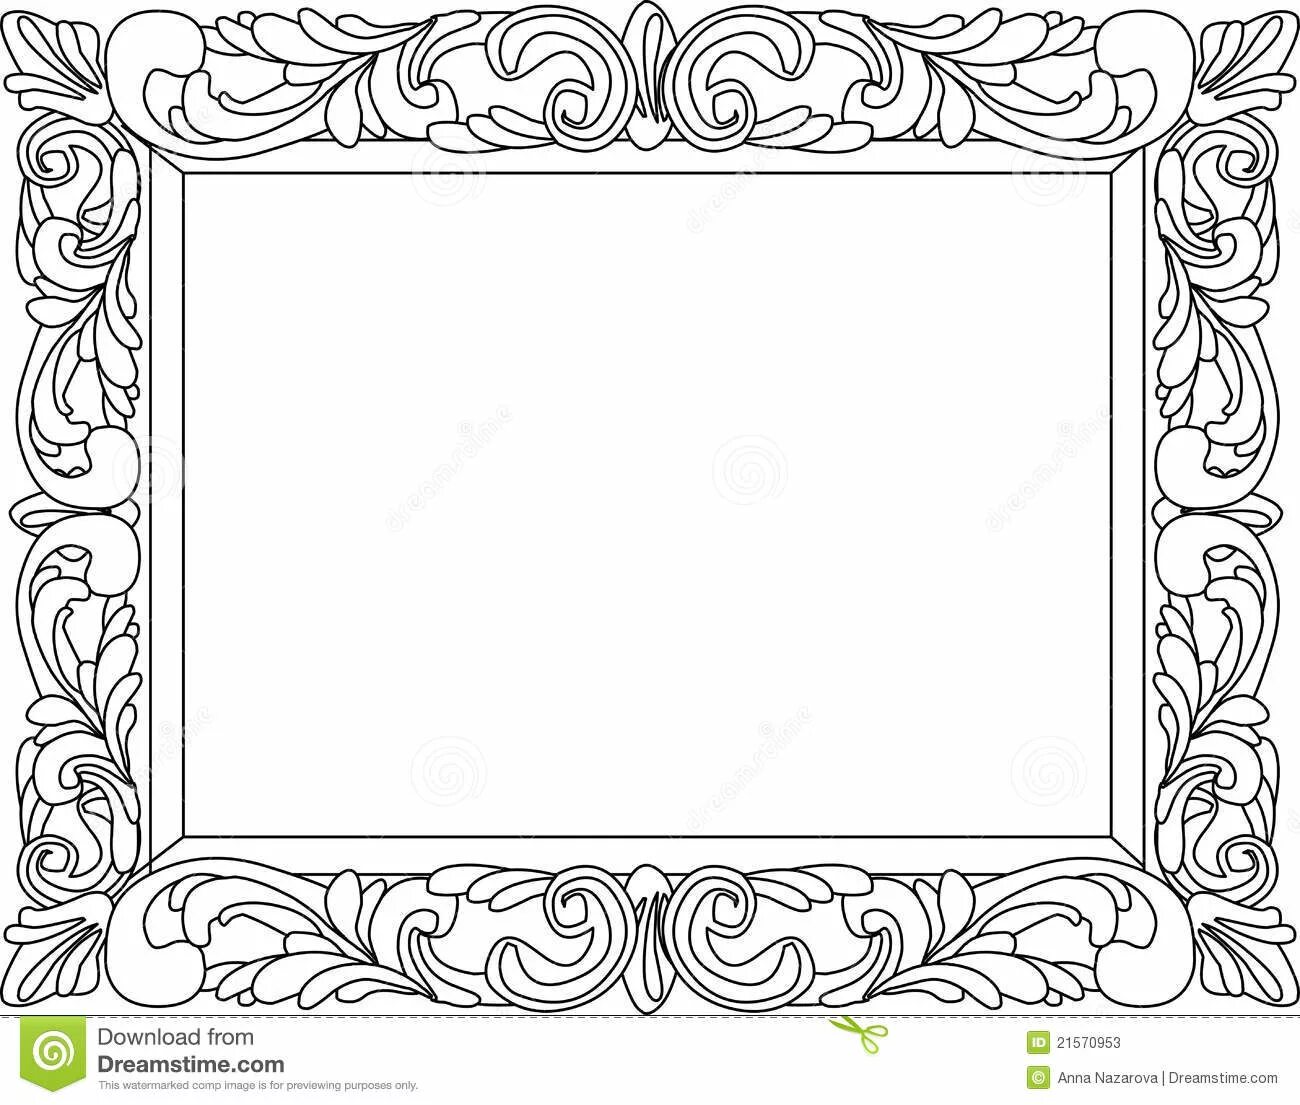 Detailed coloring page frame